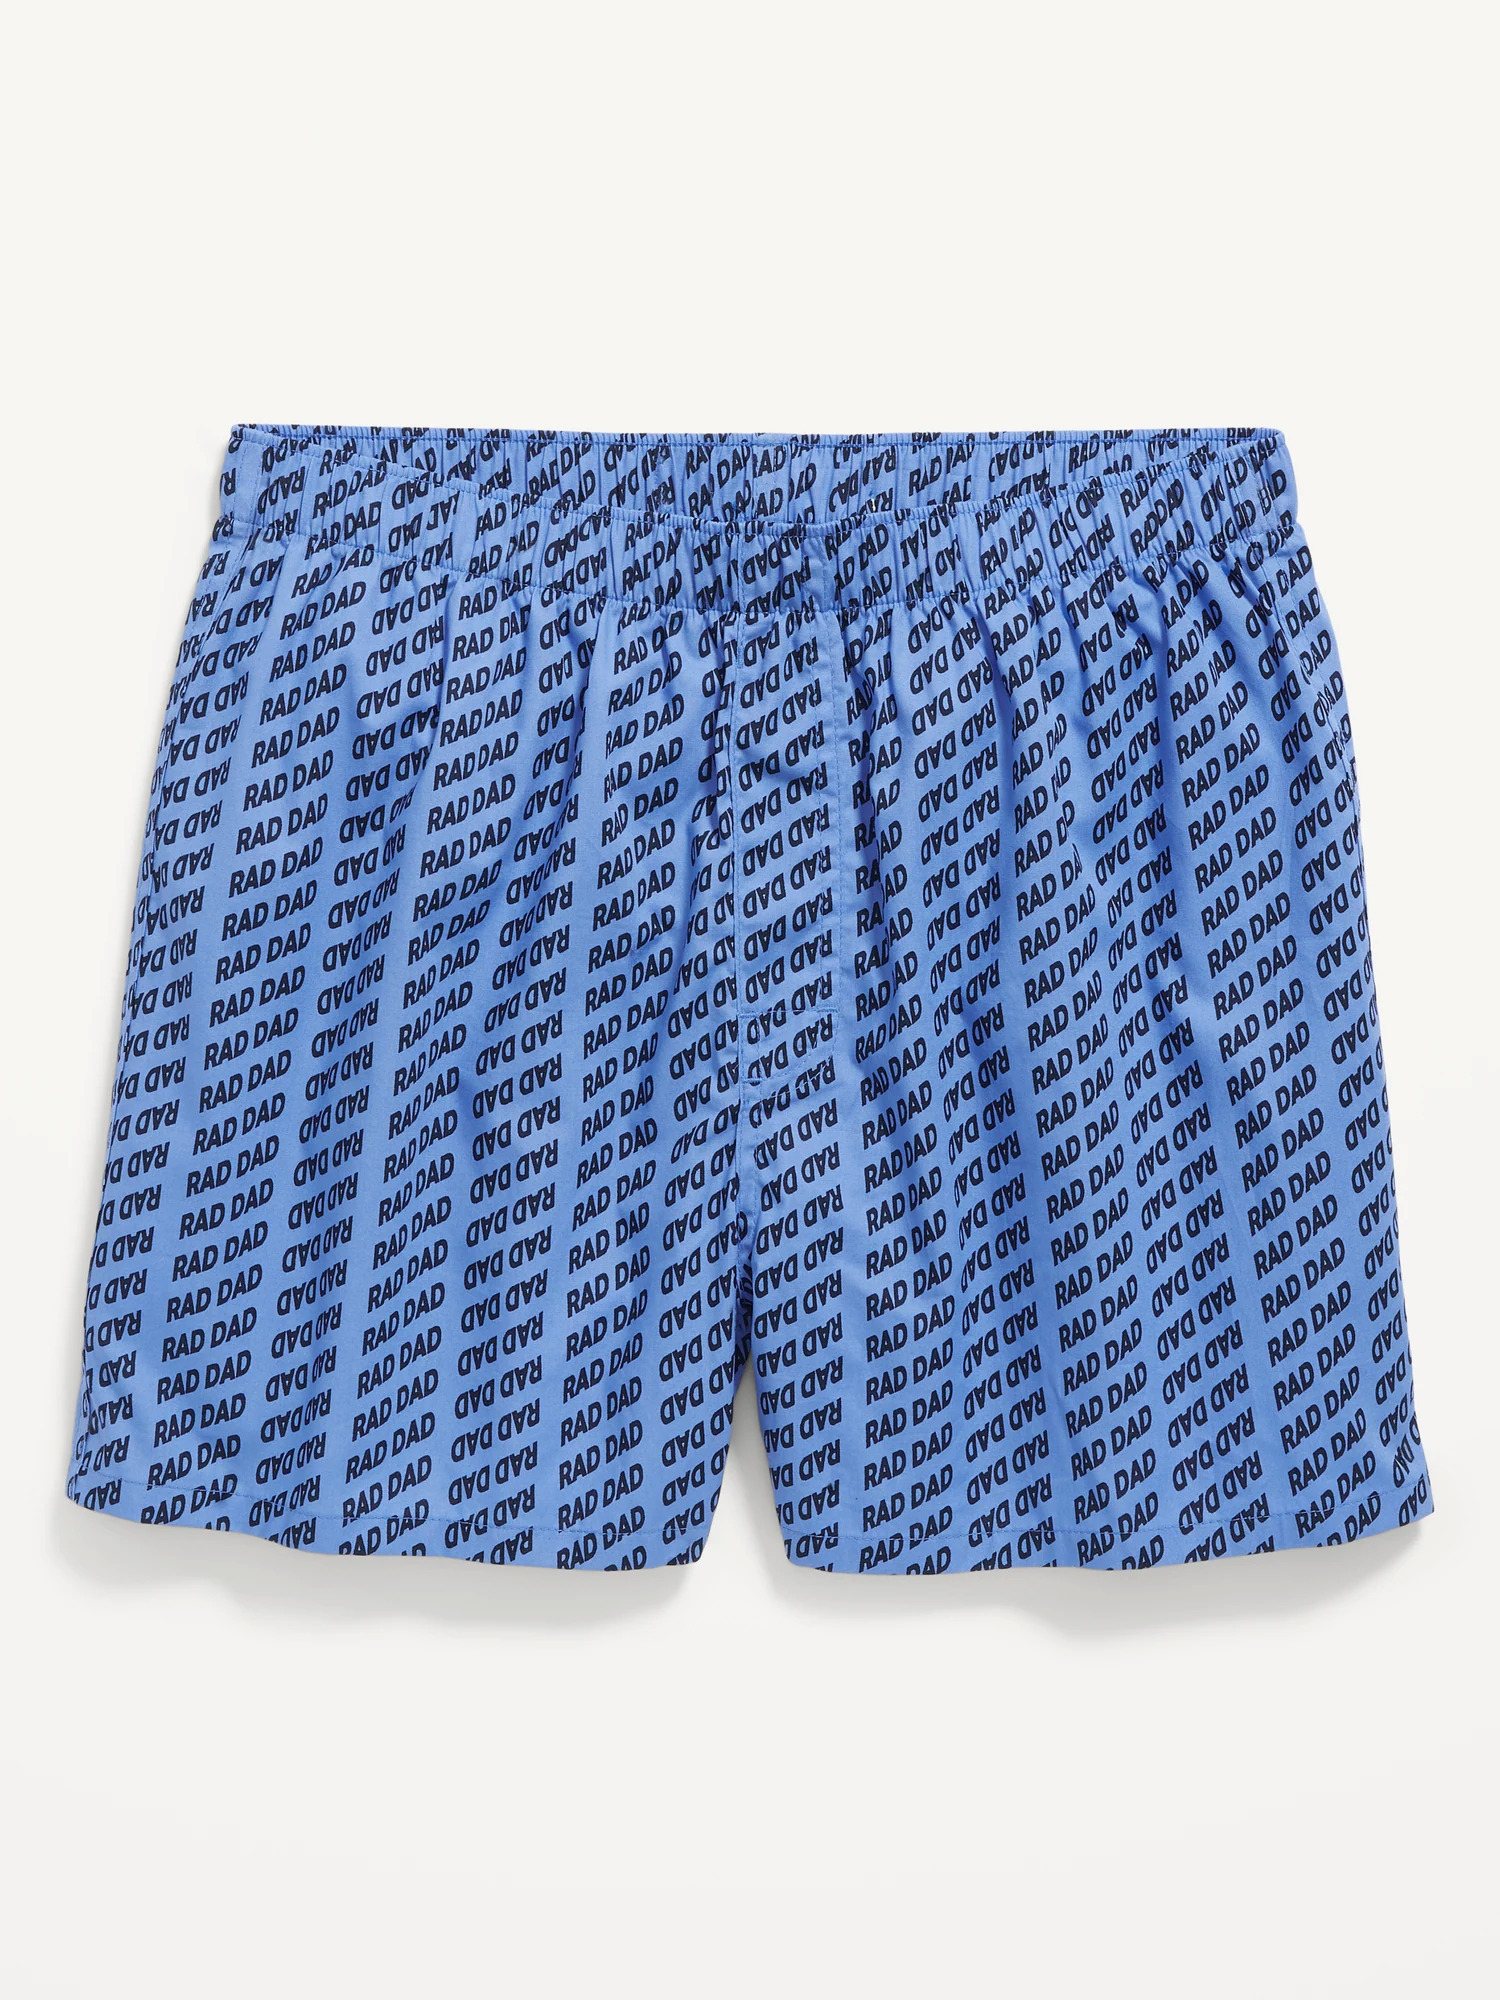 Old Navy Men's 3.75" Printed Soft-Washed Boxer Shorts (Dad) $3.48 + Free Store Pickup @ Old Navy or Free shipping on $50+